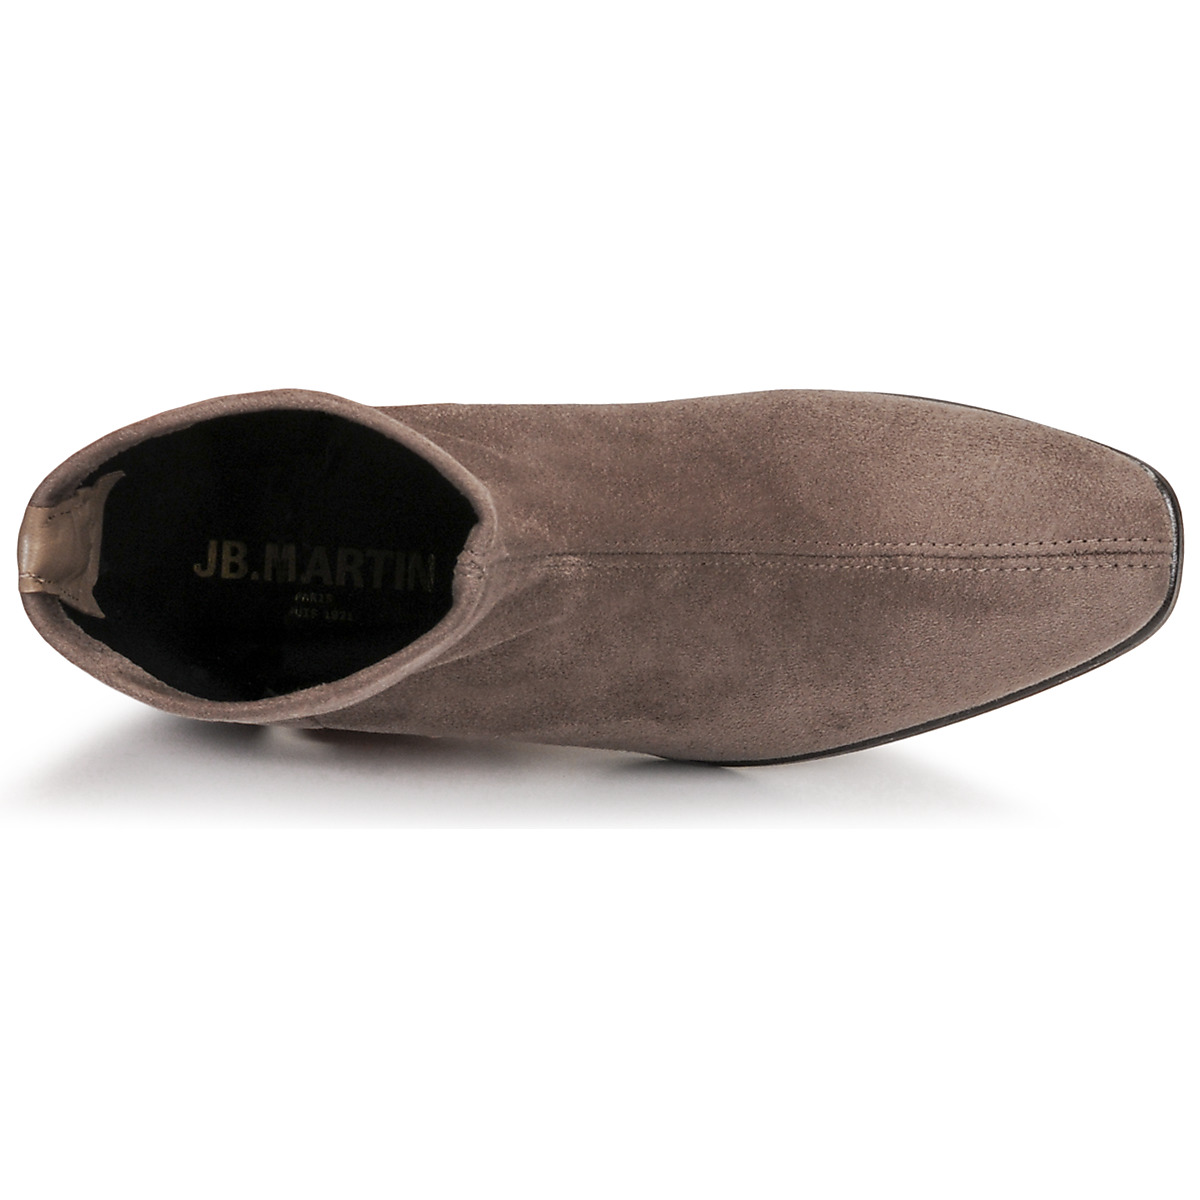 JB Martin TOILE SUEDE STRETCH TAUPE VISION XY8eyQ3I